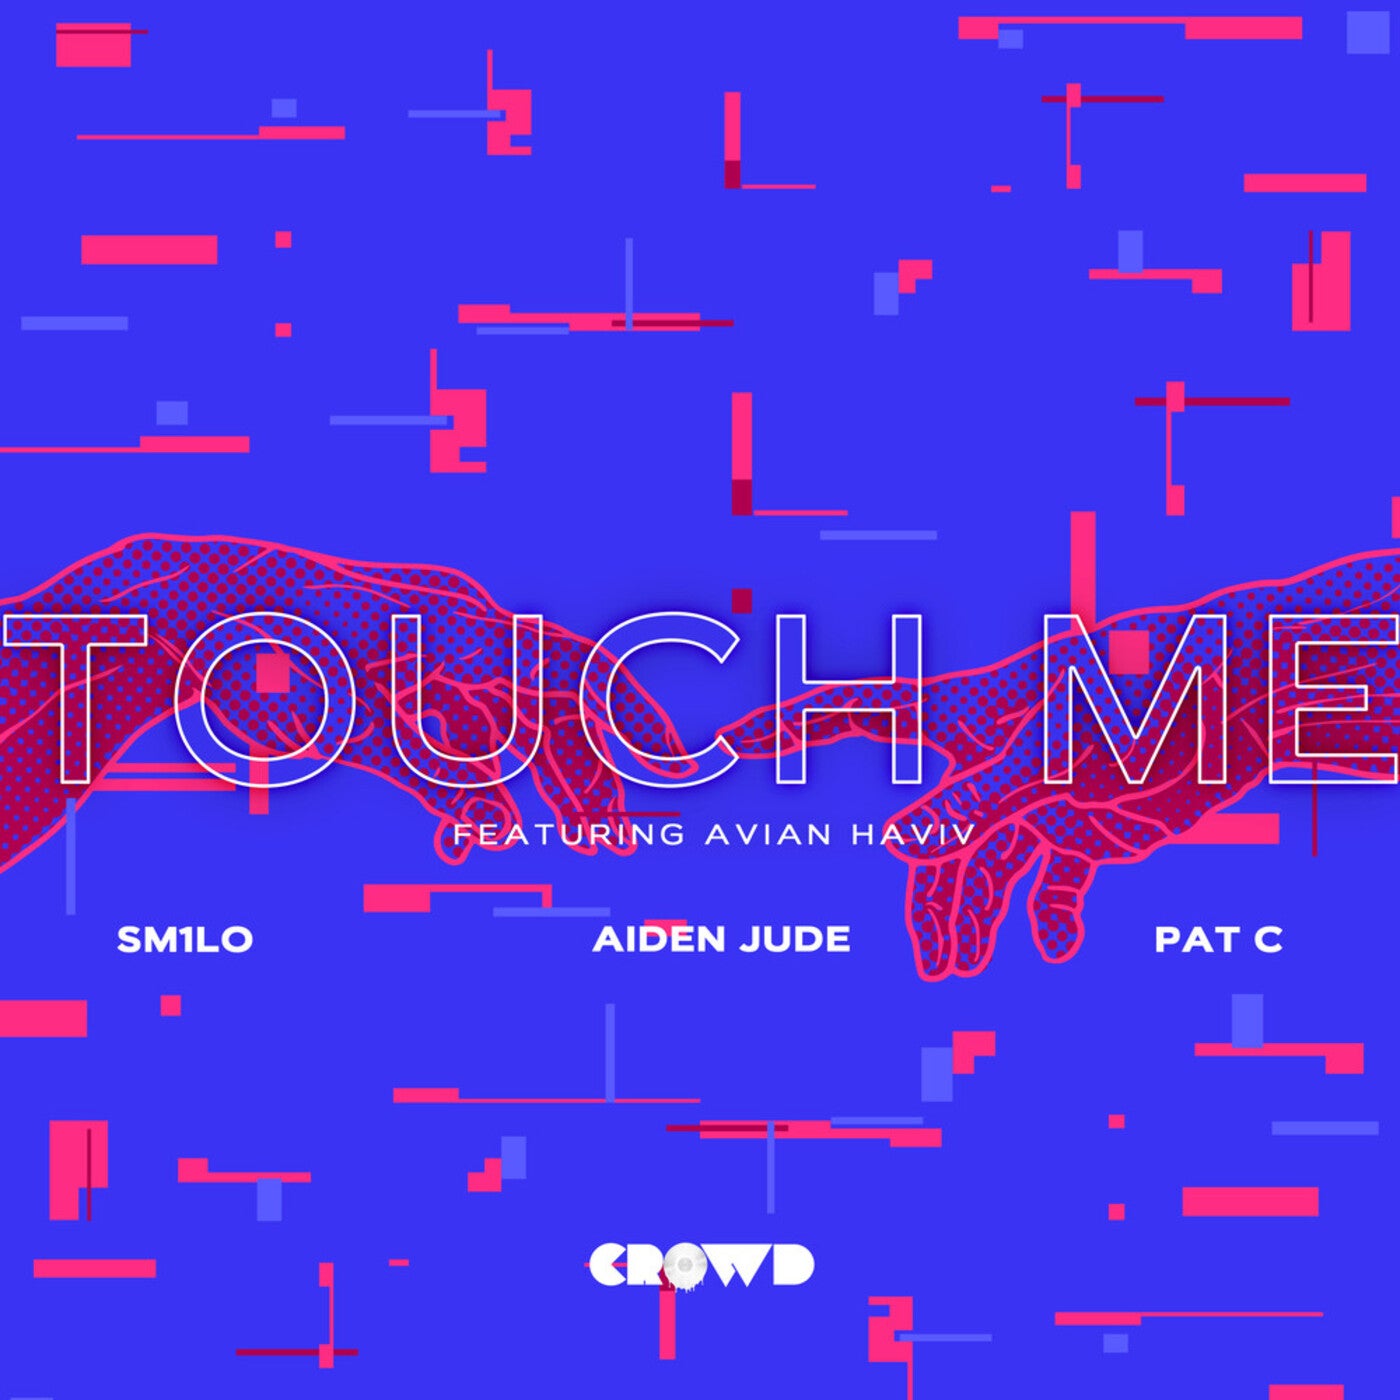 Touch Me (Extended)